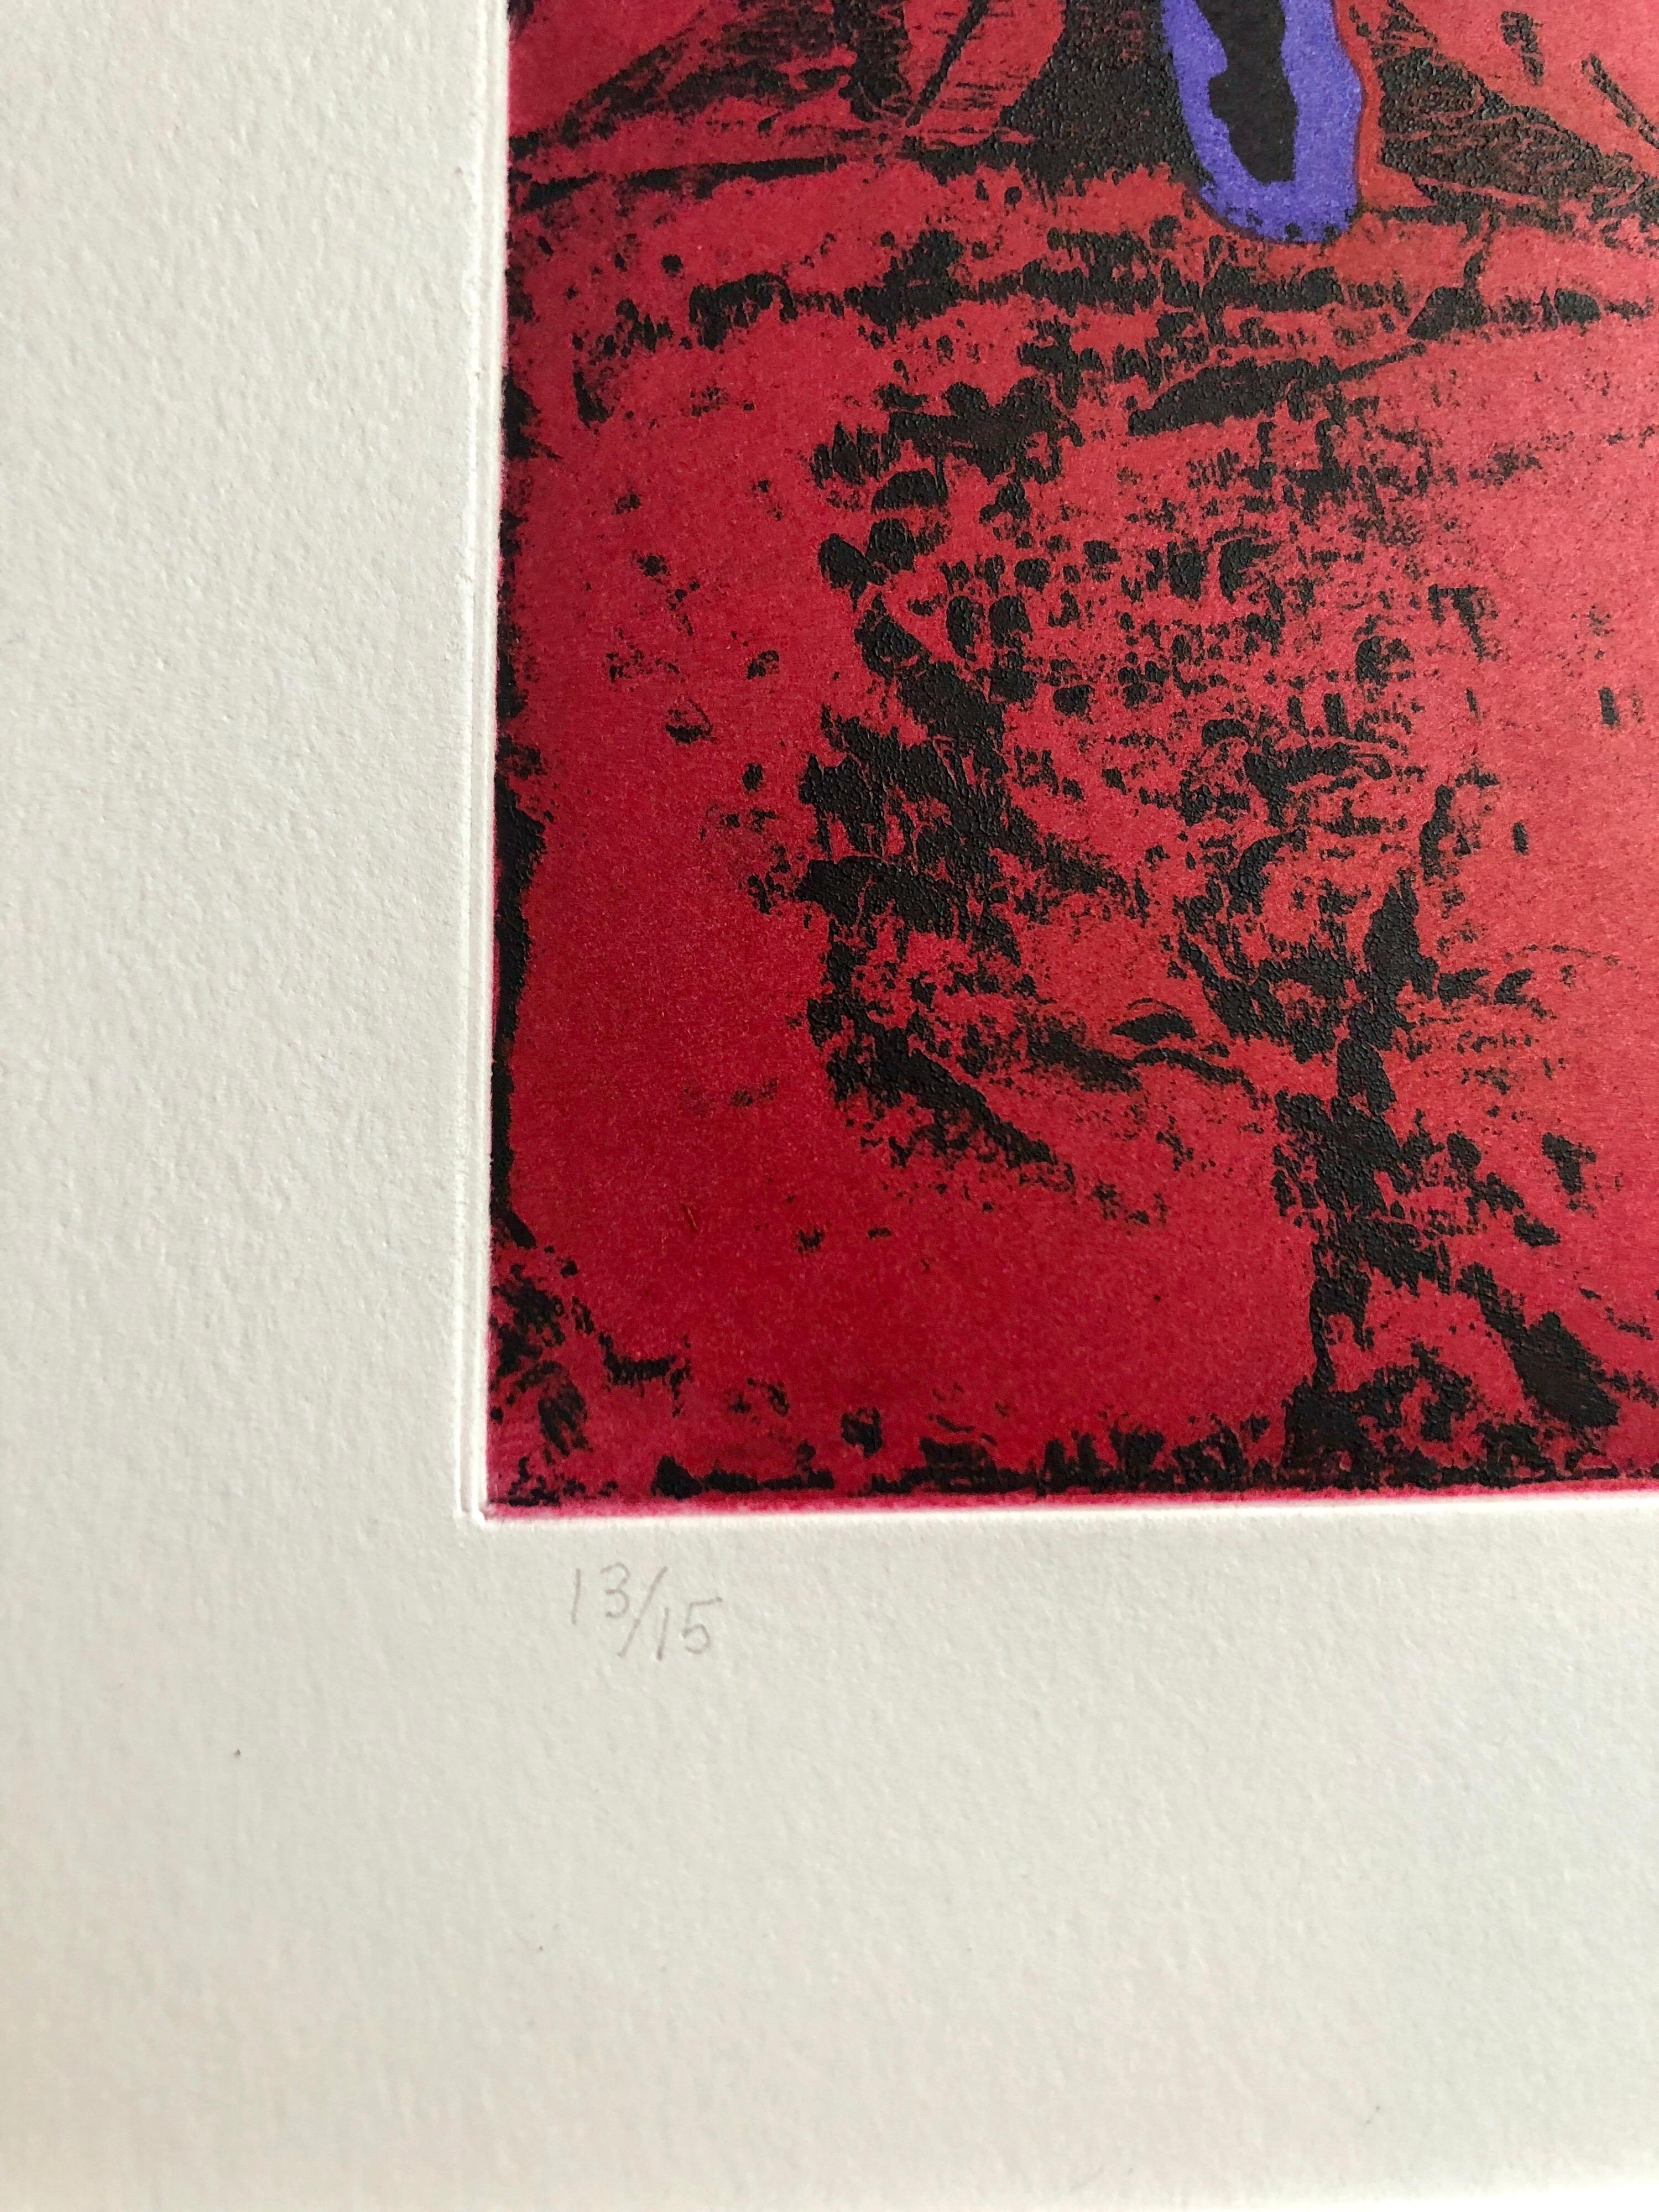 Untitled #11 Two Forms Red Ground Abstract Expressionist Aquatint Etching 2